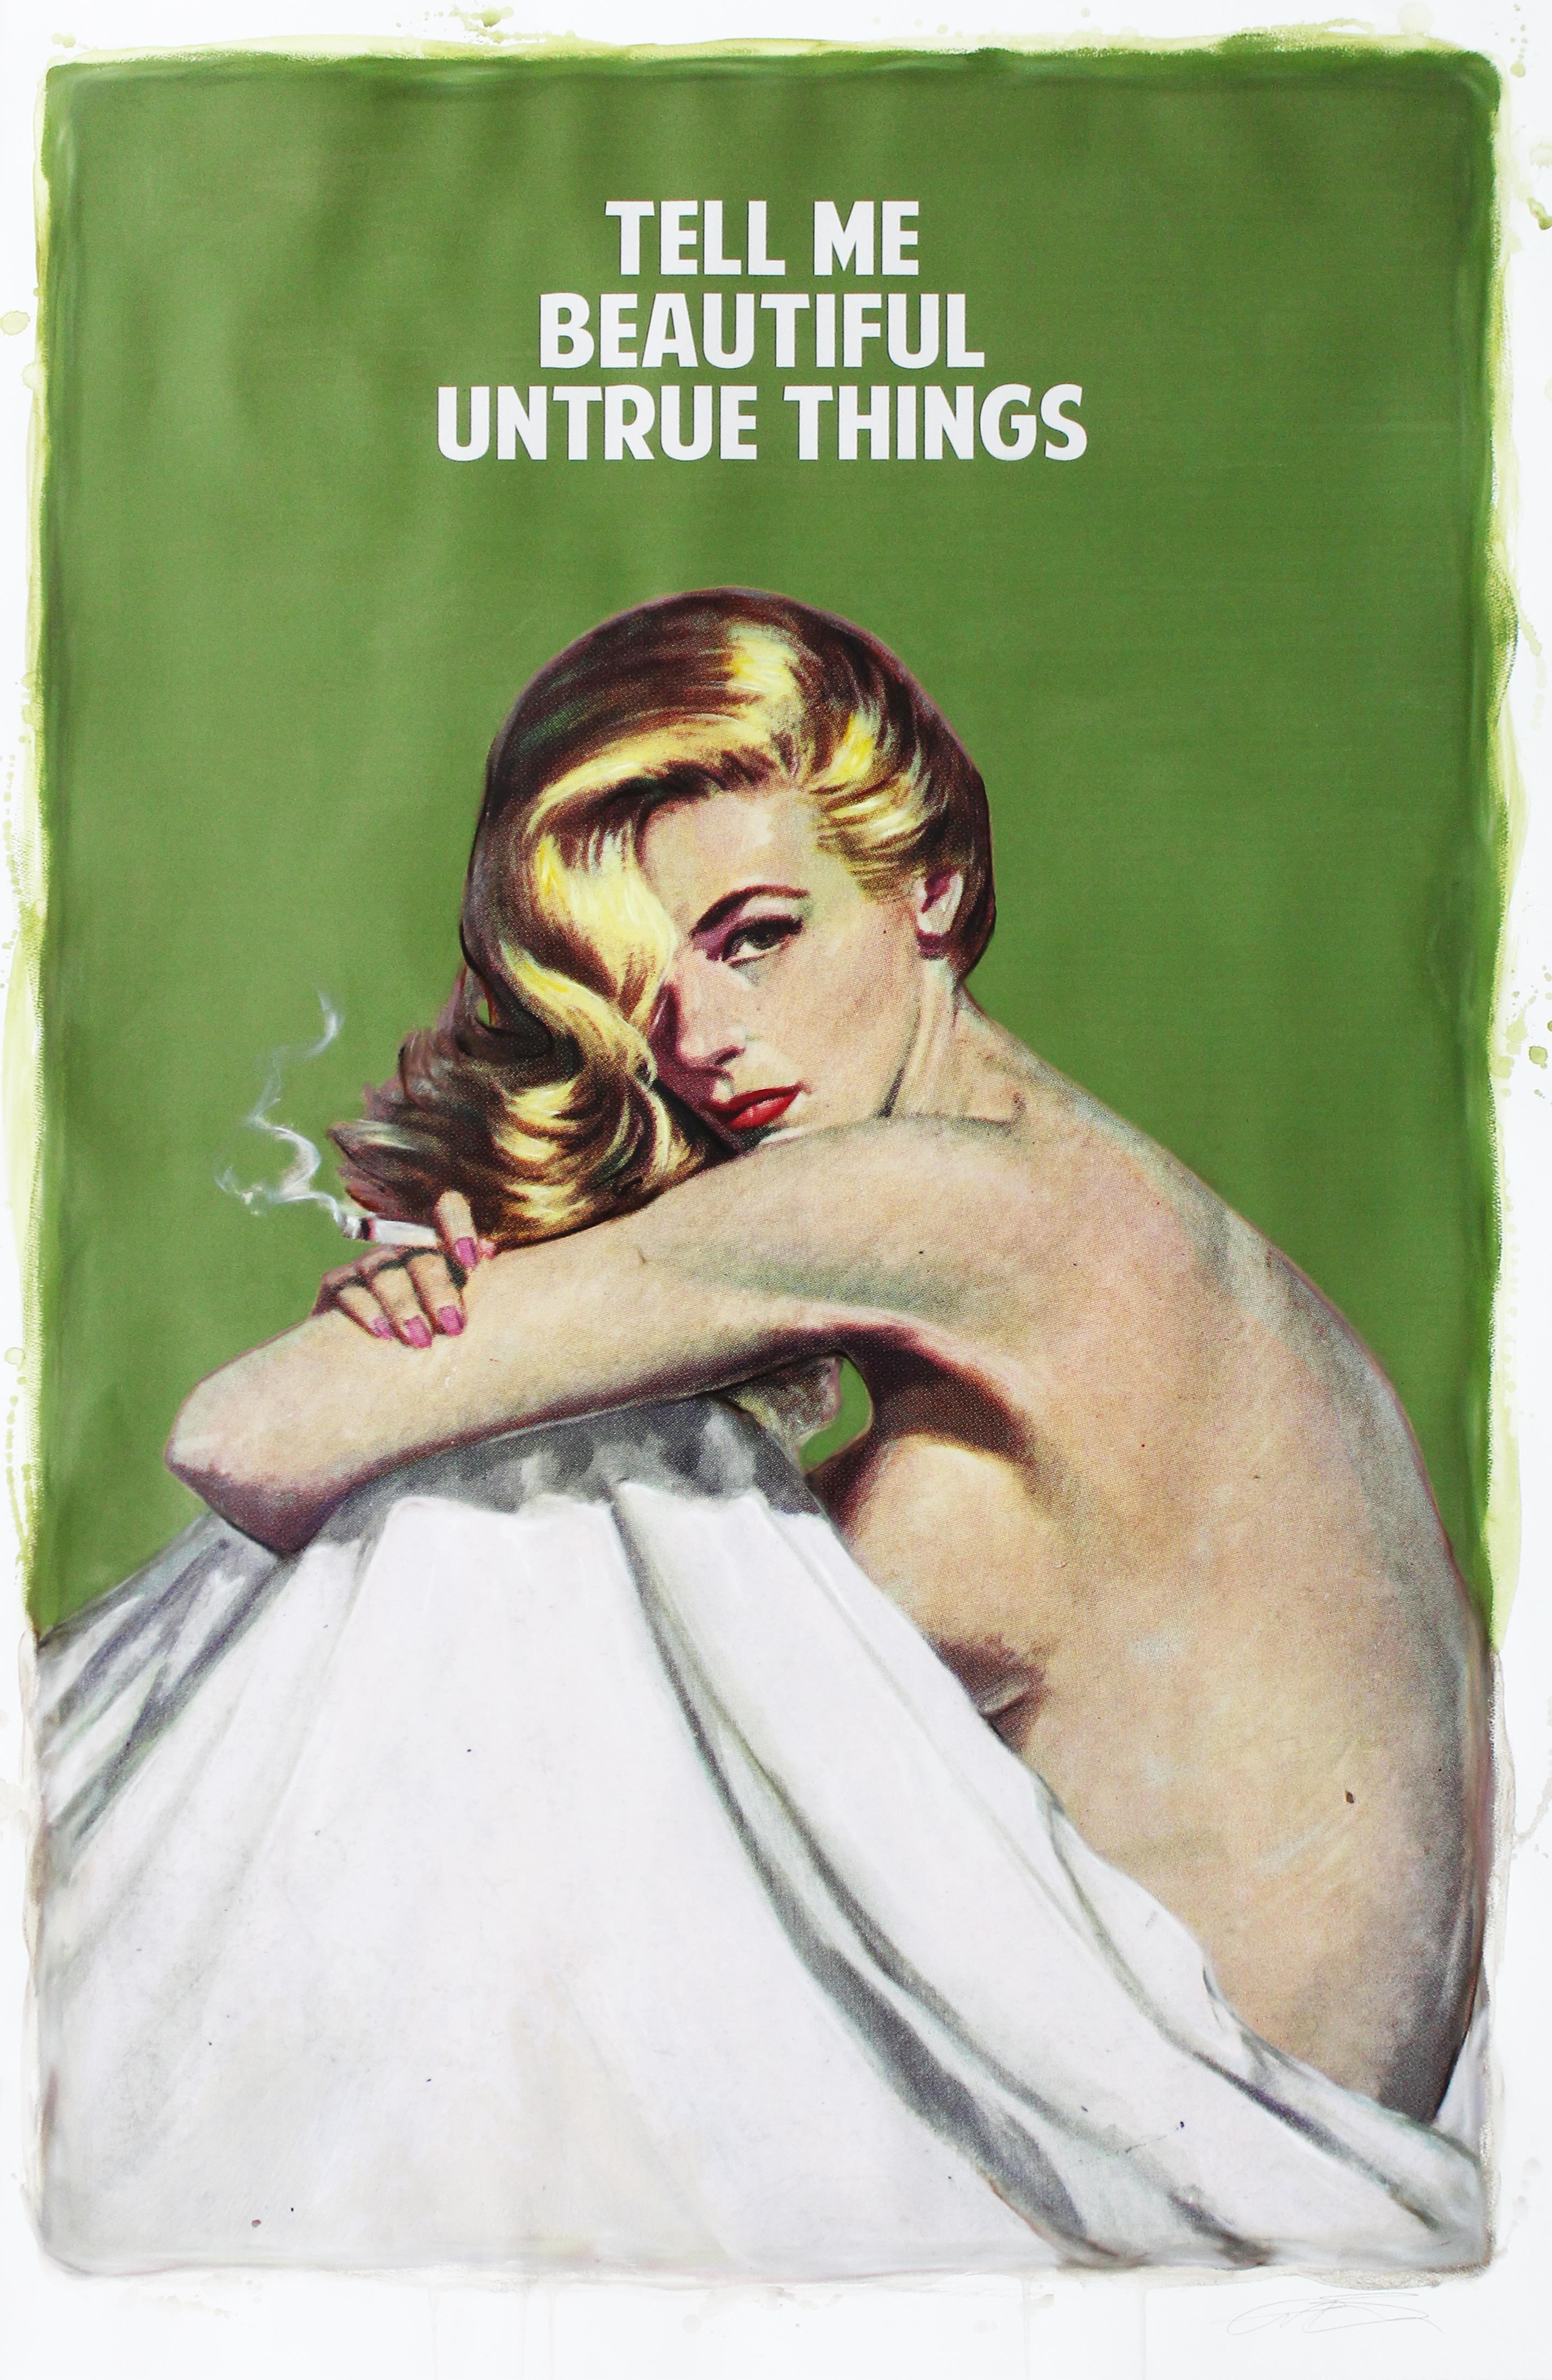 Tell Me Beautiful Untrue Things (Green)  - Print by The Connor Brothers 